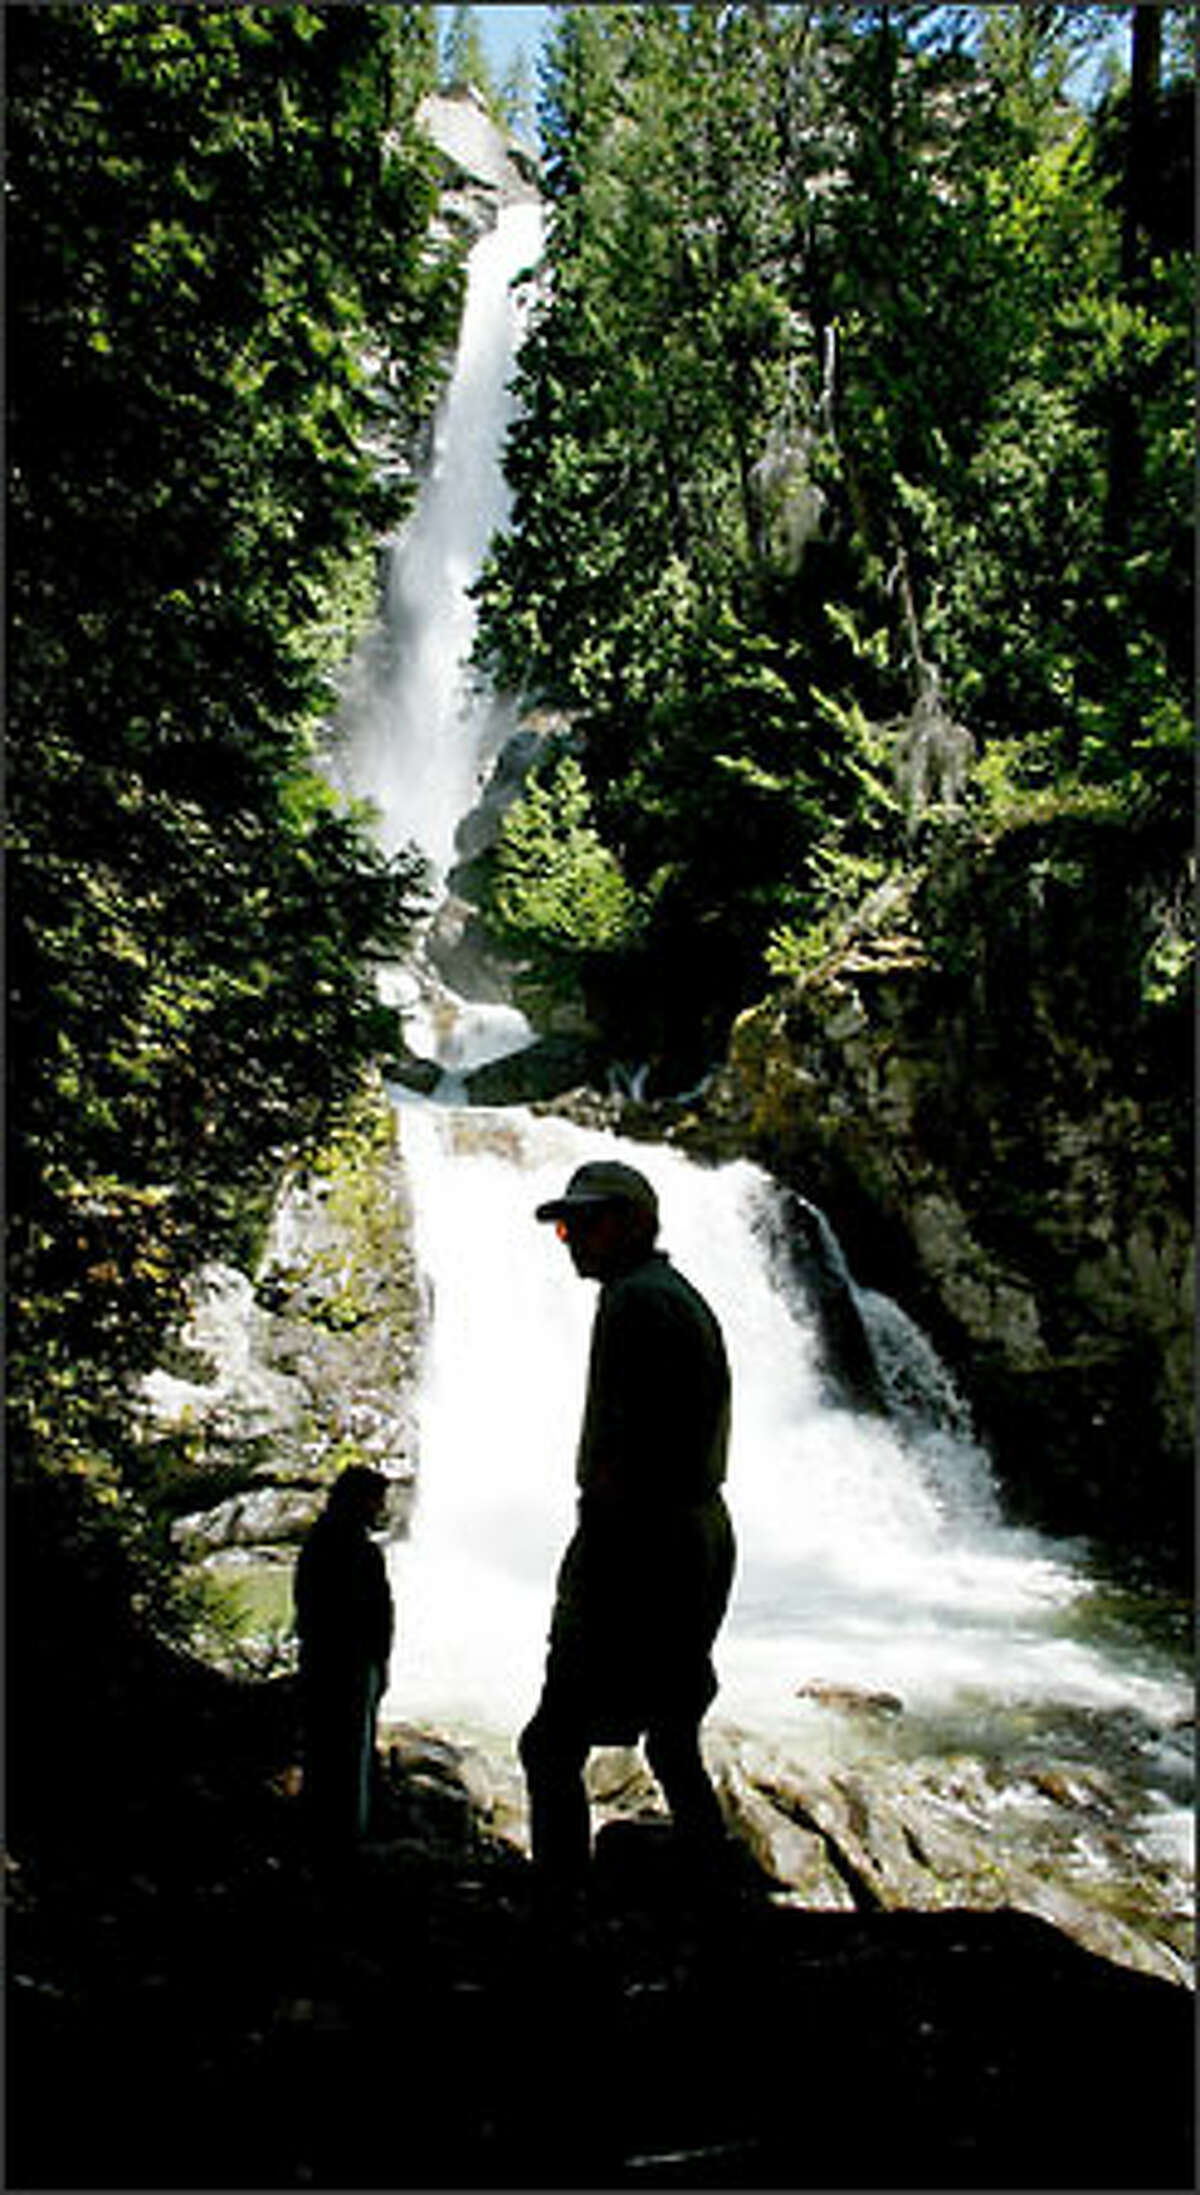 Rainbow Falls (Stehekin): The 312-foot-high waterfall, in the Lake Chelan National Recreation Area,  is a scenic gem of the Stehekin Valley, at the head of Lake Chelan.  It an be reached by taking a National Park Service bus up valley, or by renting a bicycle. Rainbow Falls  can be enjoyed from a picnic area by the road, or by a short trail that climbs up stairs to the left.  The falls is framed in Ponderosa pines.  The remote valley is a wonderful place to camp out and hang out for a few days, away from the 24/7 news cycle and the internet. Be thankful of citizens in the 1960's who worked to create the North Cascades National Park complex.